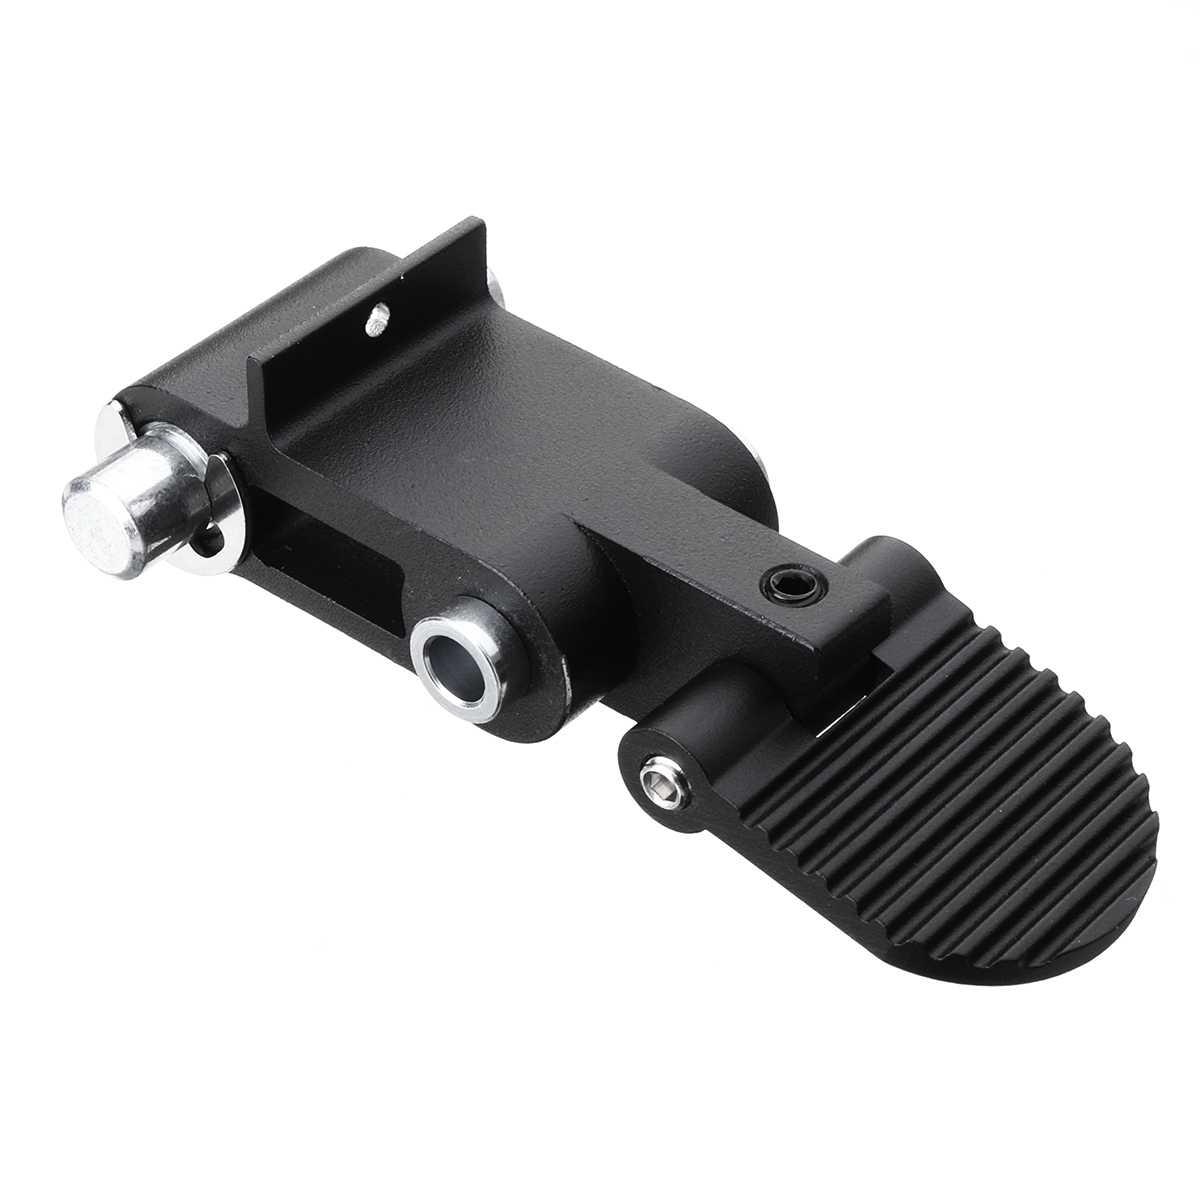 Black Folding Mechanism Repair Replacement for Ninebot Nine ES2 Scooter - Auto GoShop